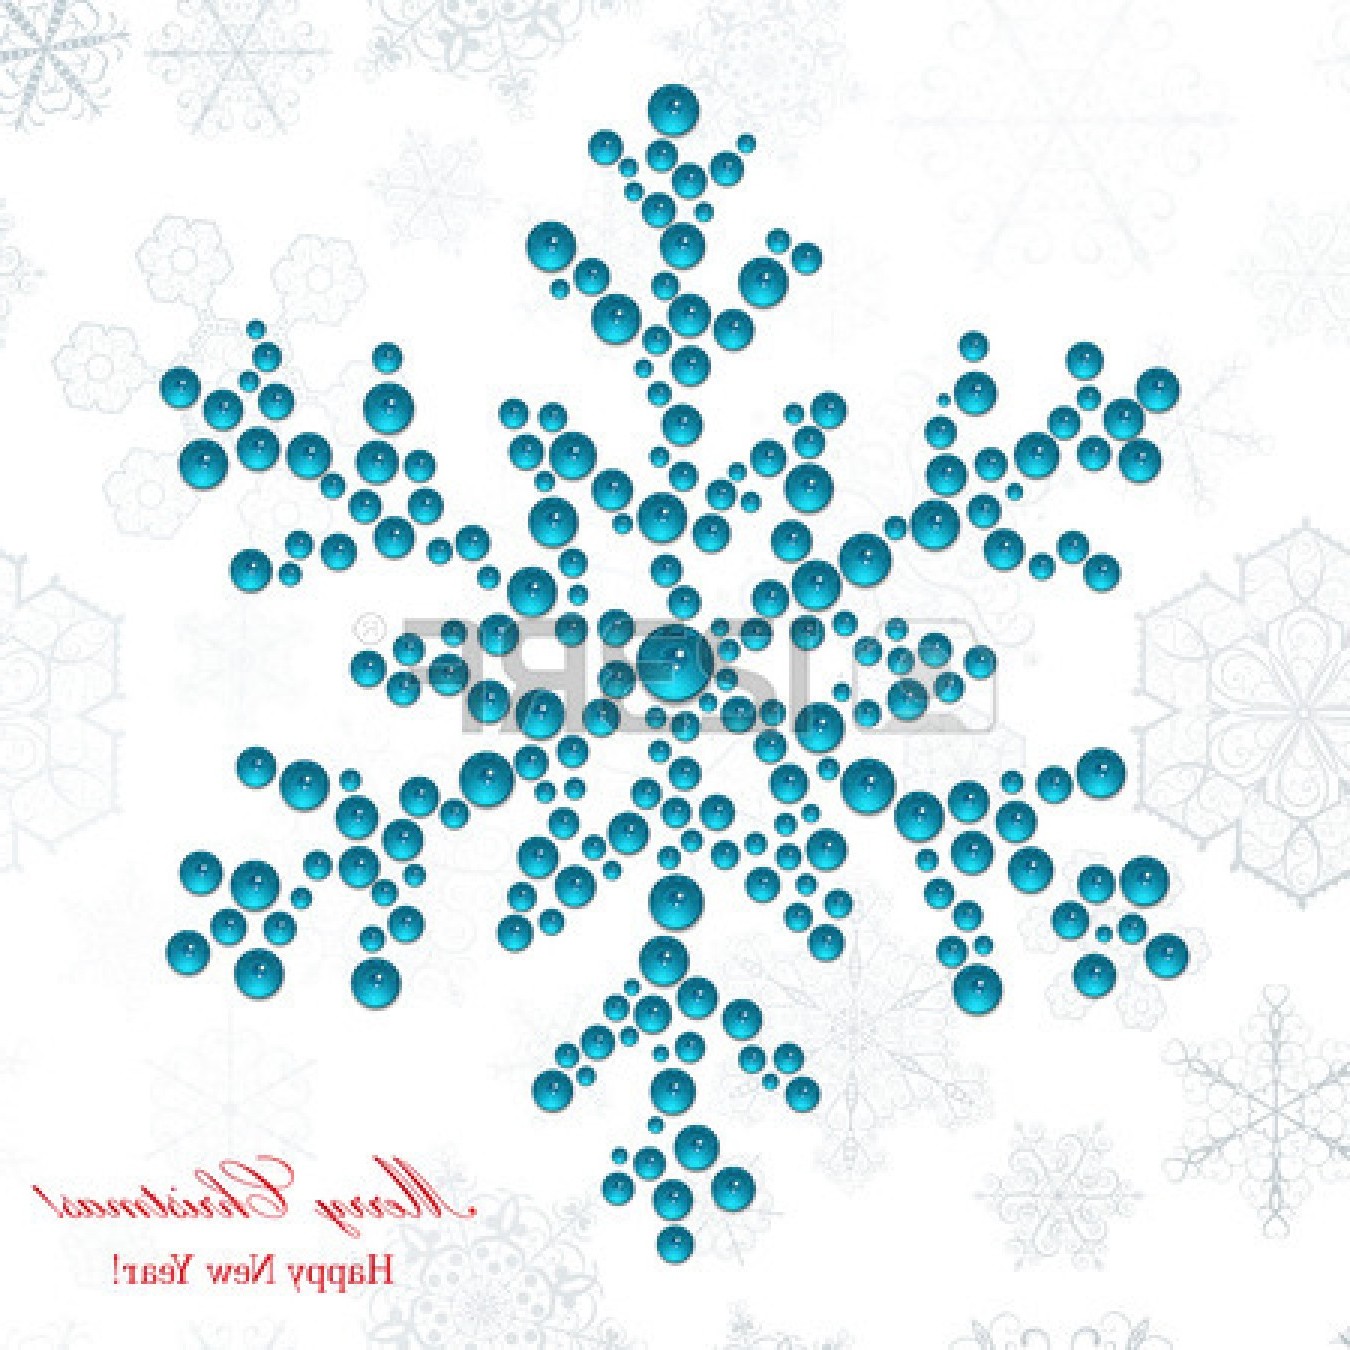 Bead Bead Necklace Clipart   Cliparthut   Free Clipart